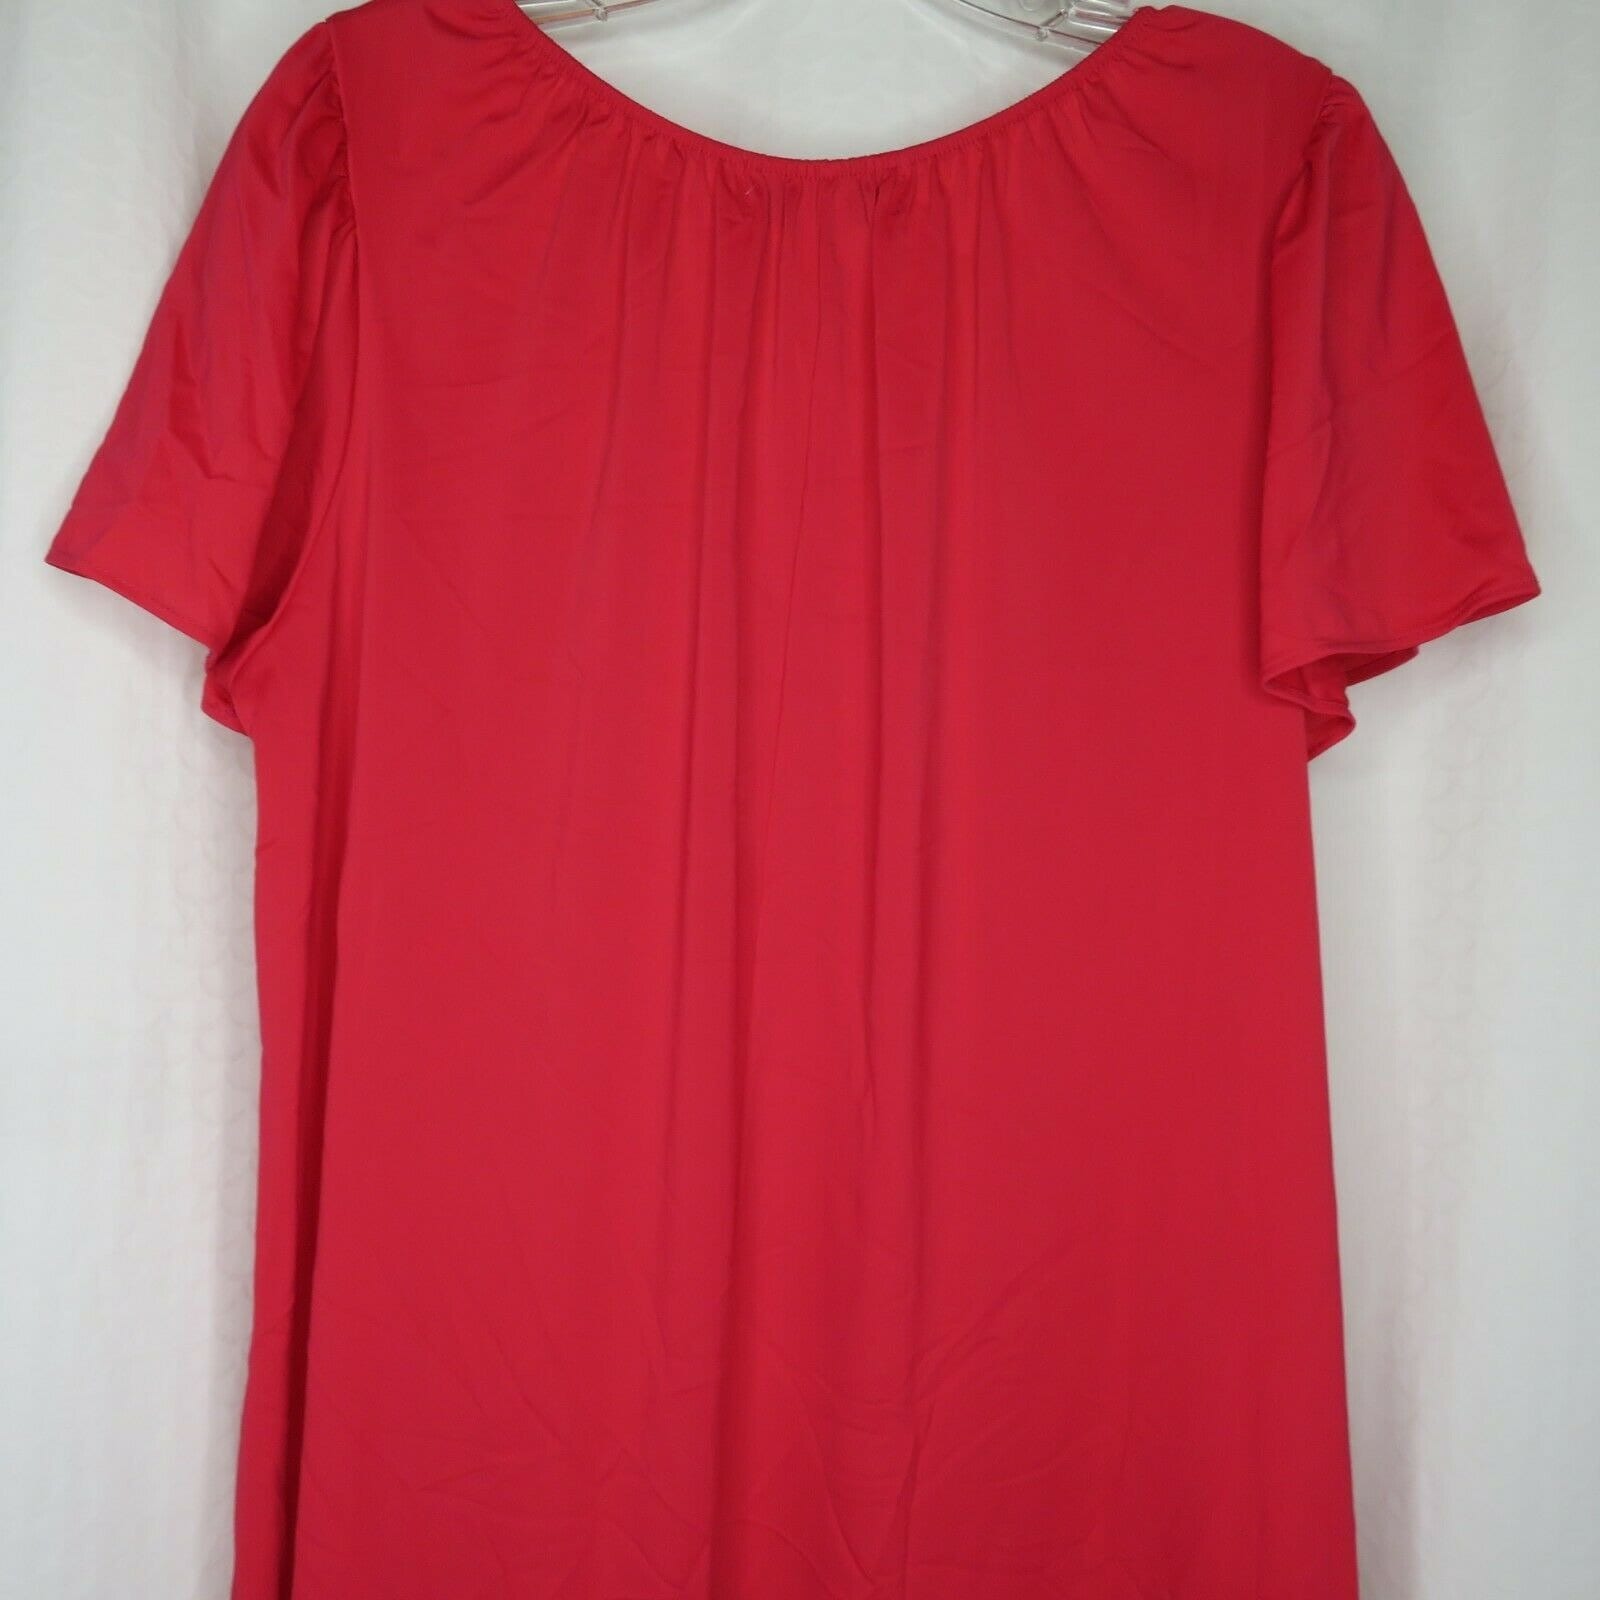 Vintage Miss Elaine Red Nightgown by Miss Elaine Collette | Shop THRILLING